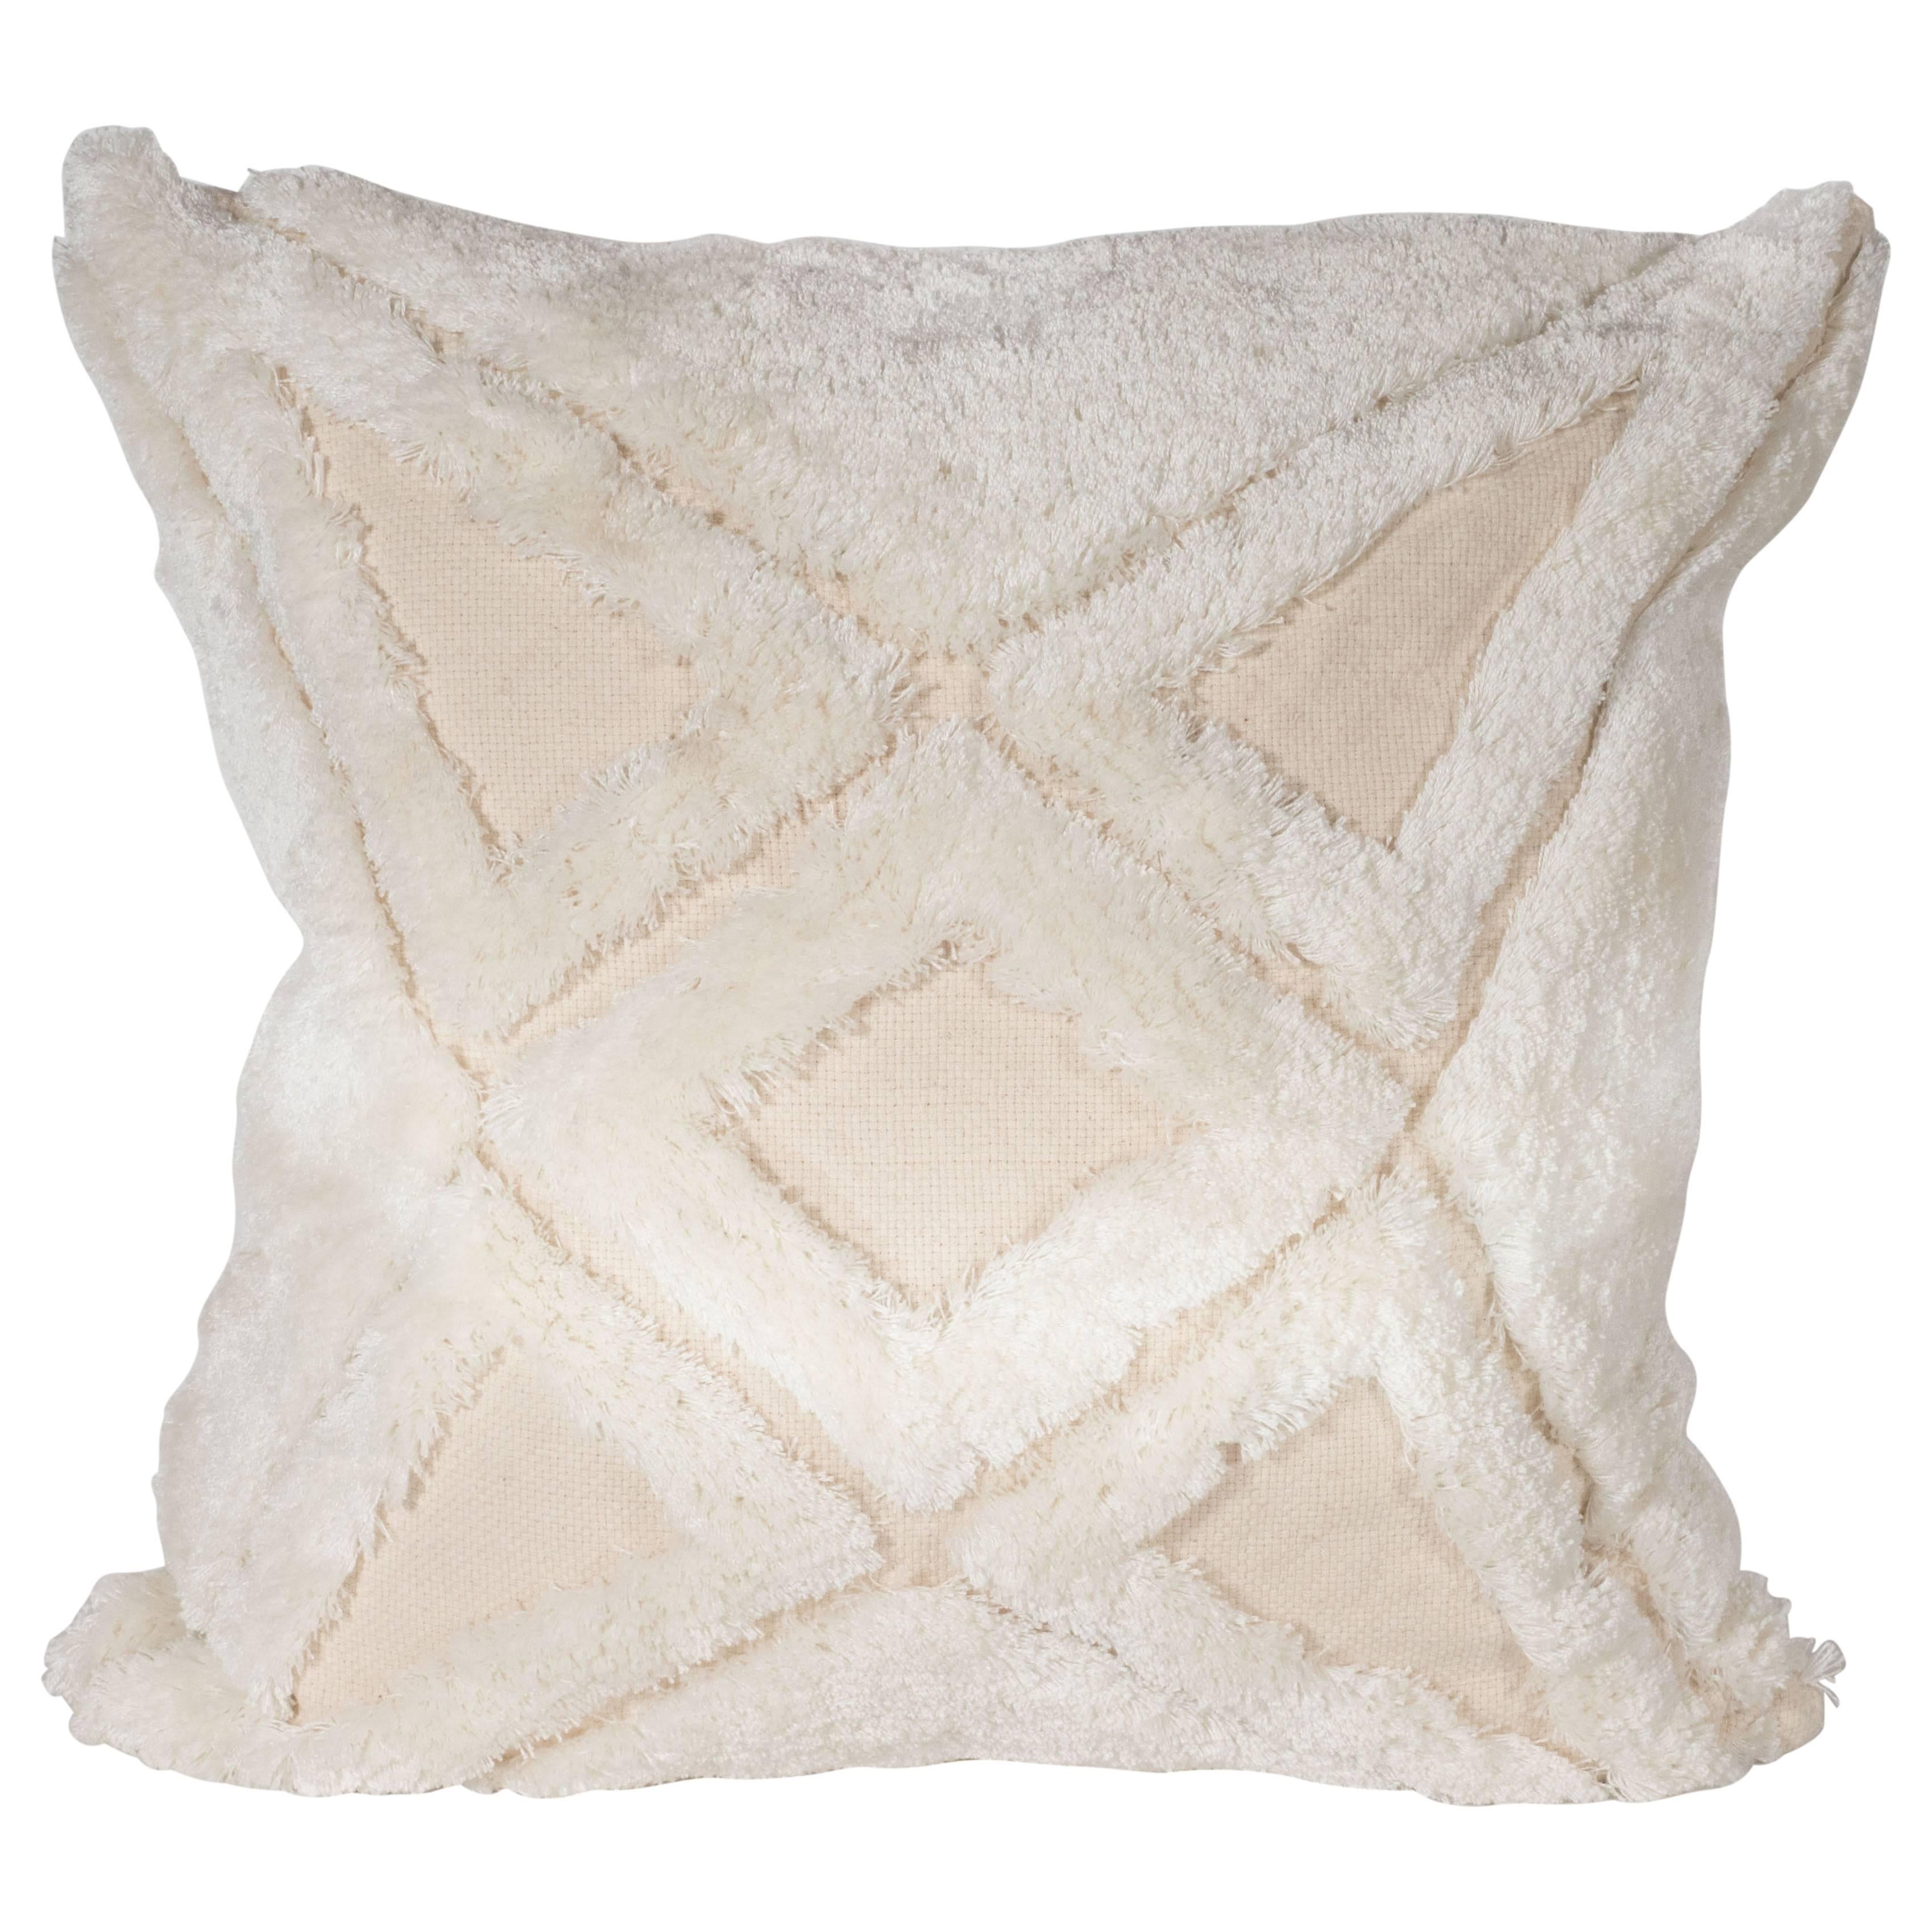 Modernist Textural Cotton Cream Pillow with White Geometric Patterns Throughout For Sale